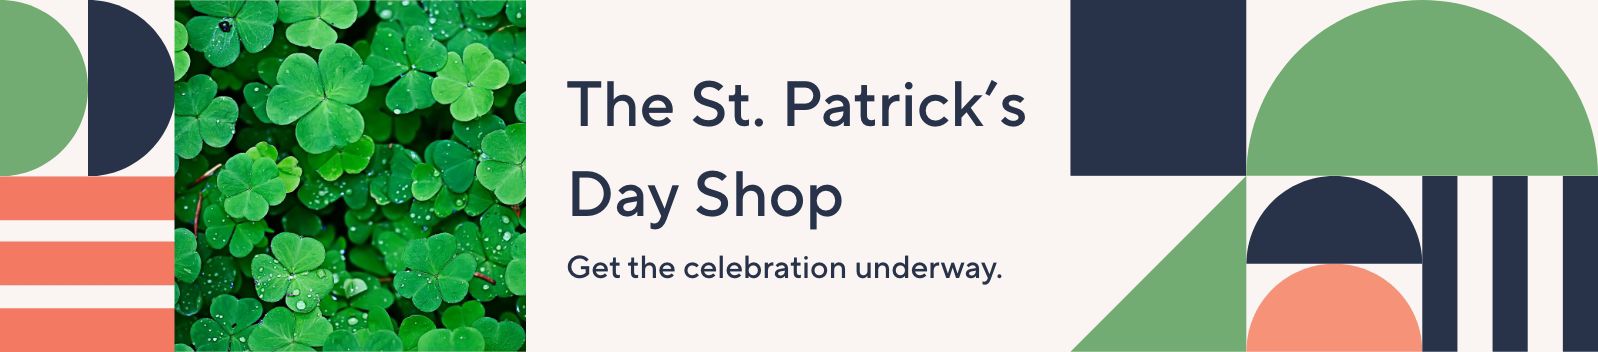 The St. Patrick's Day Shop.  Get the celebration underway.